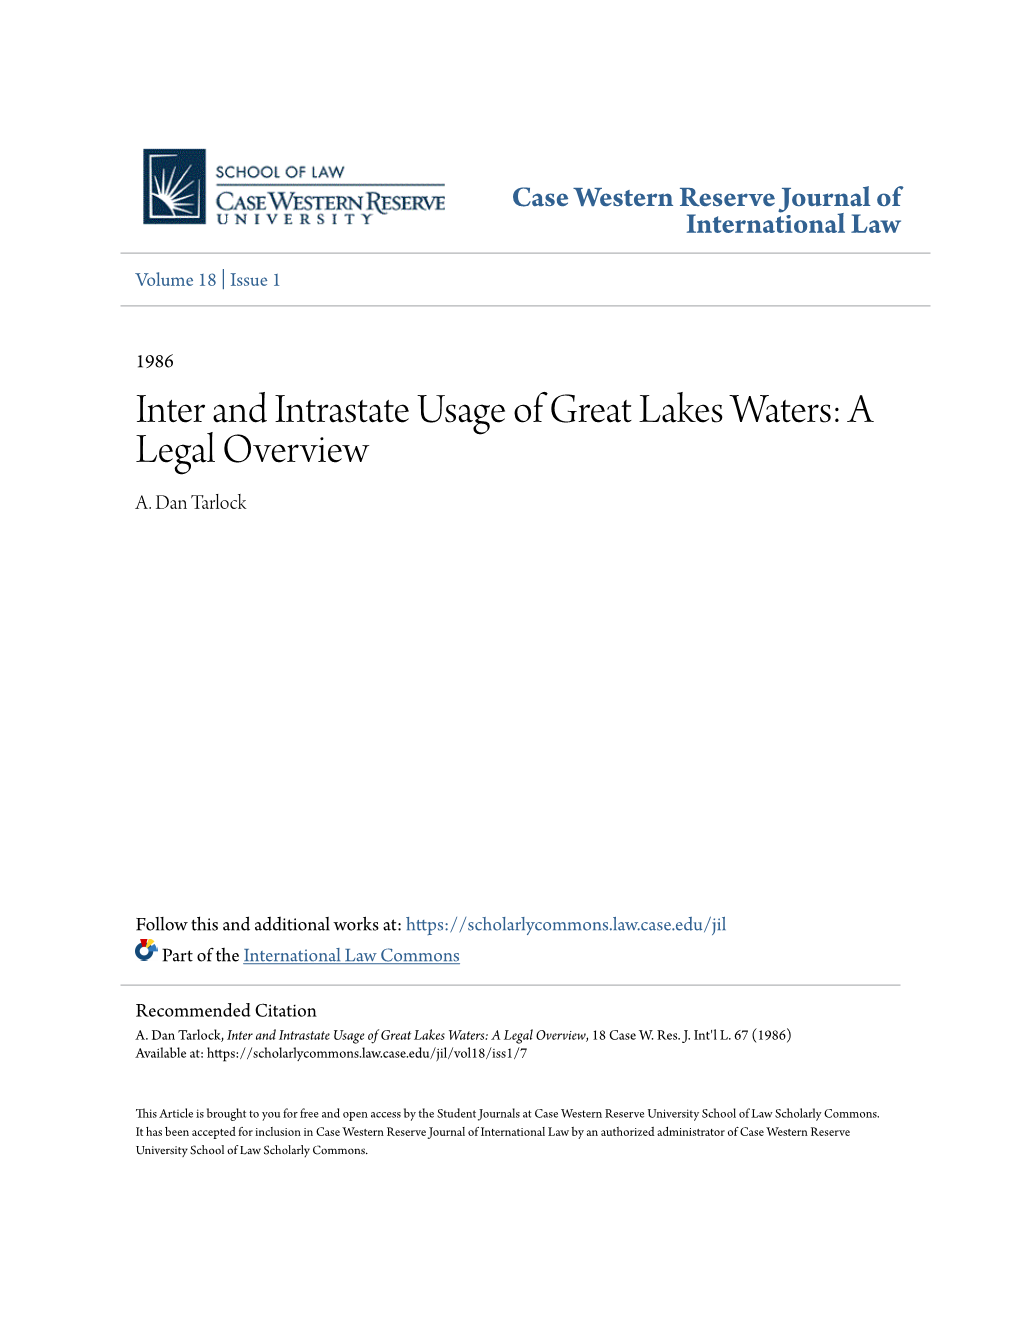 Inter and Intrastate Usage of Great Lakes Waters: a Legal Overview A